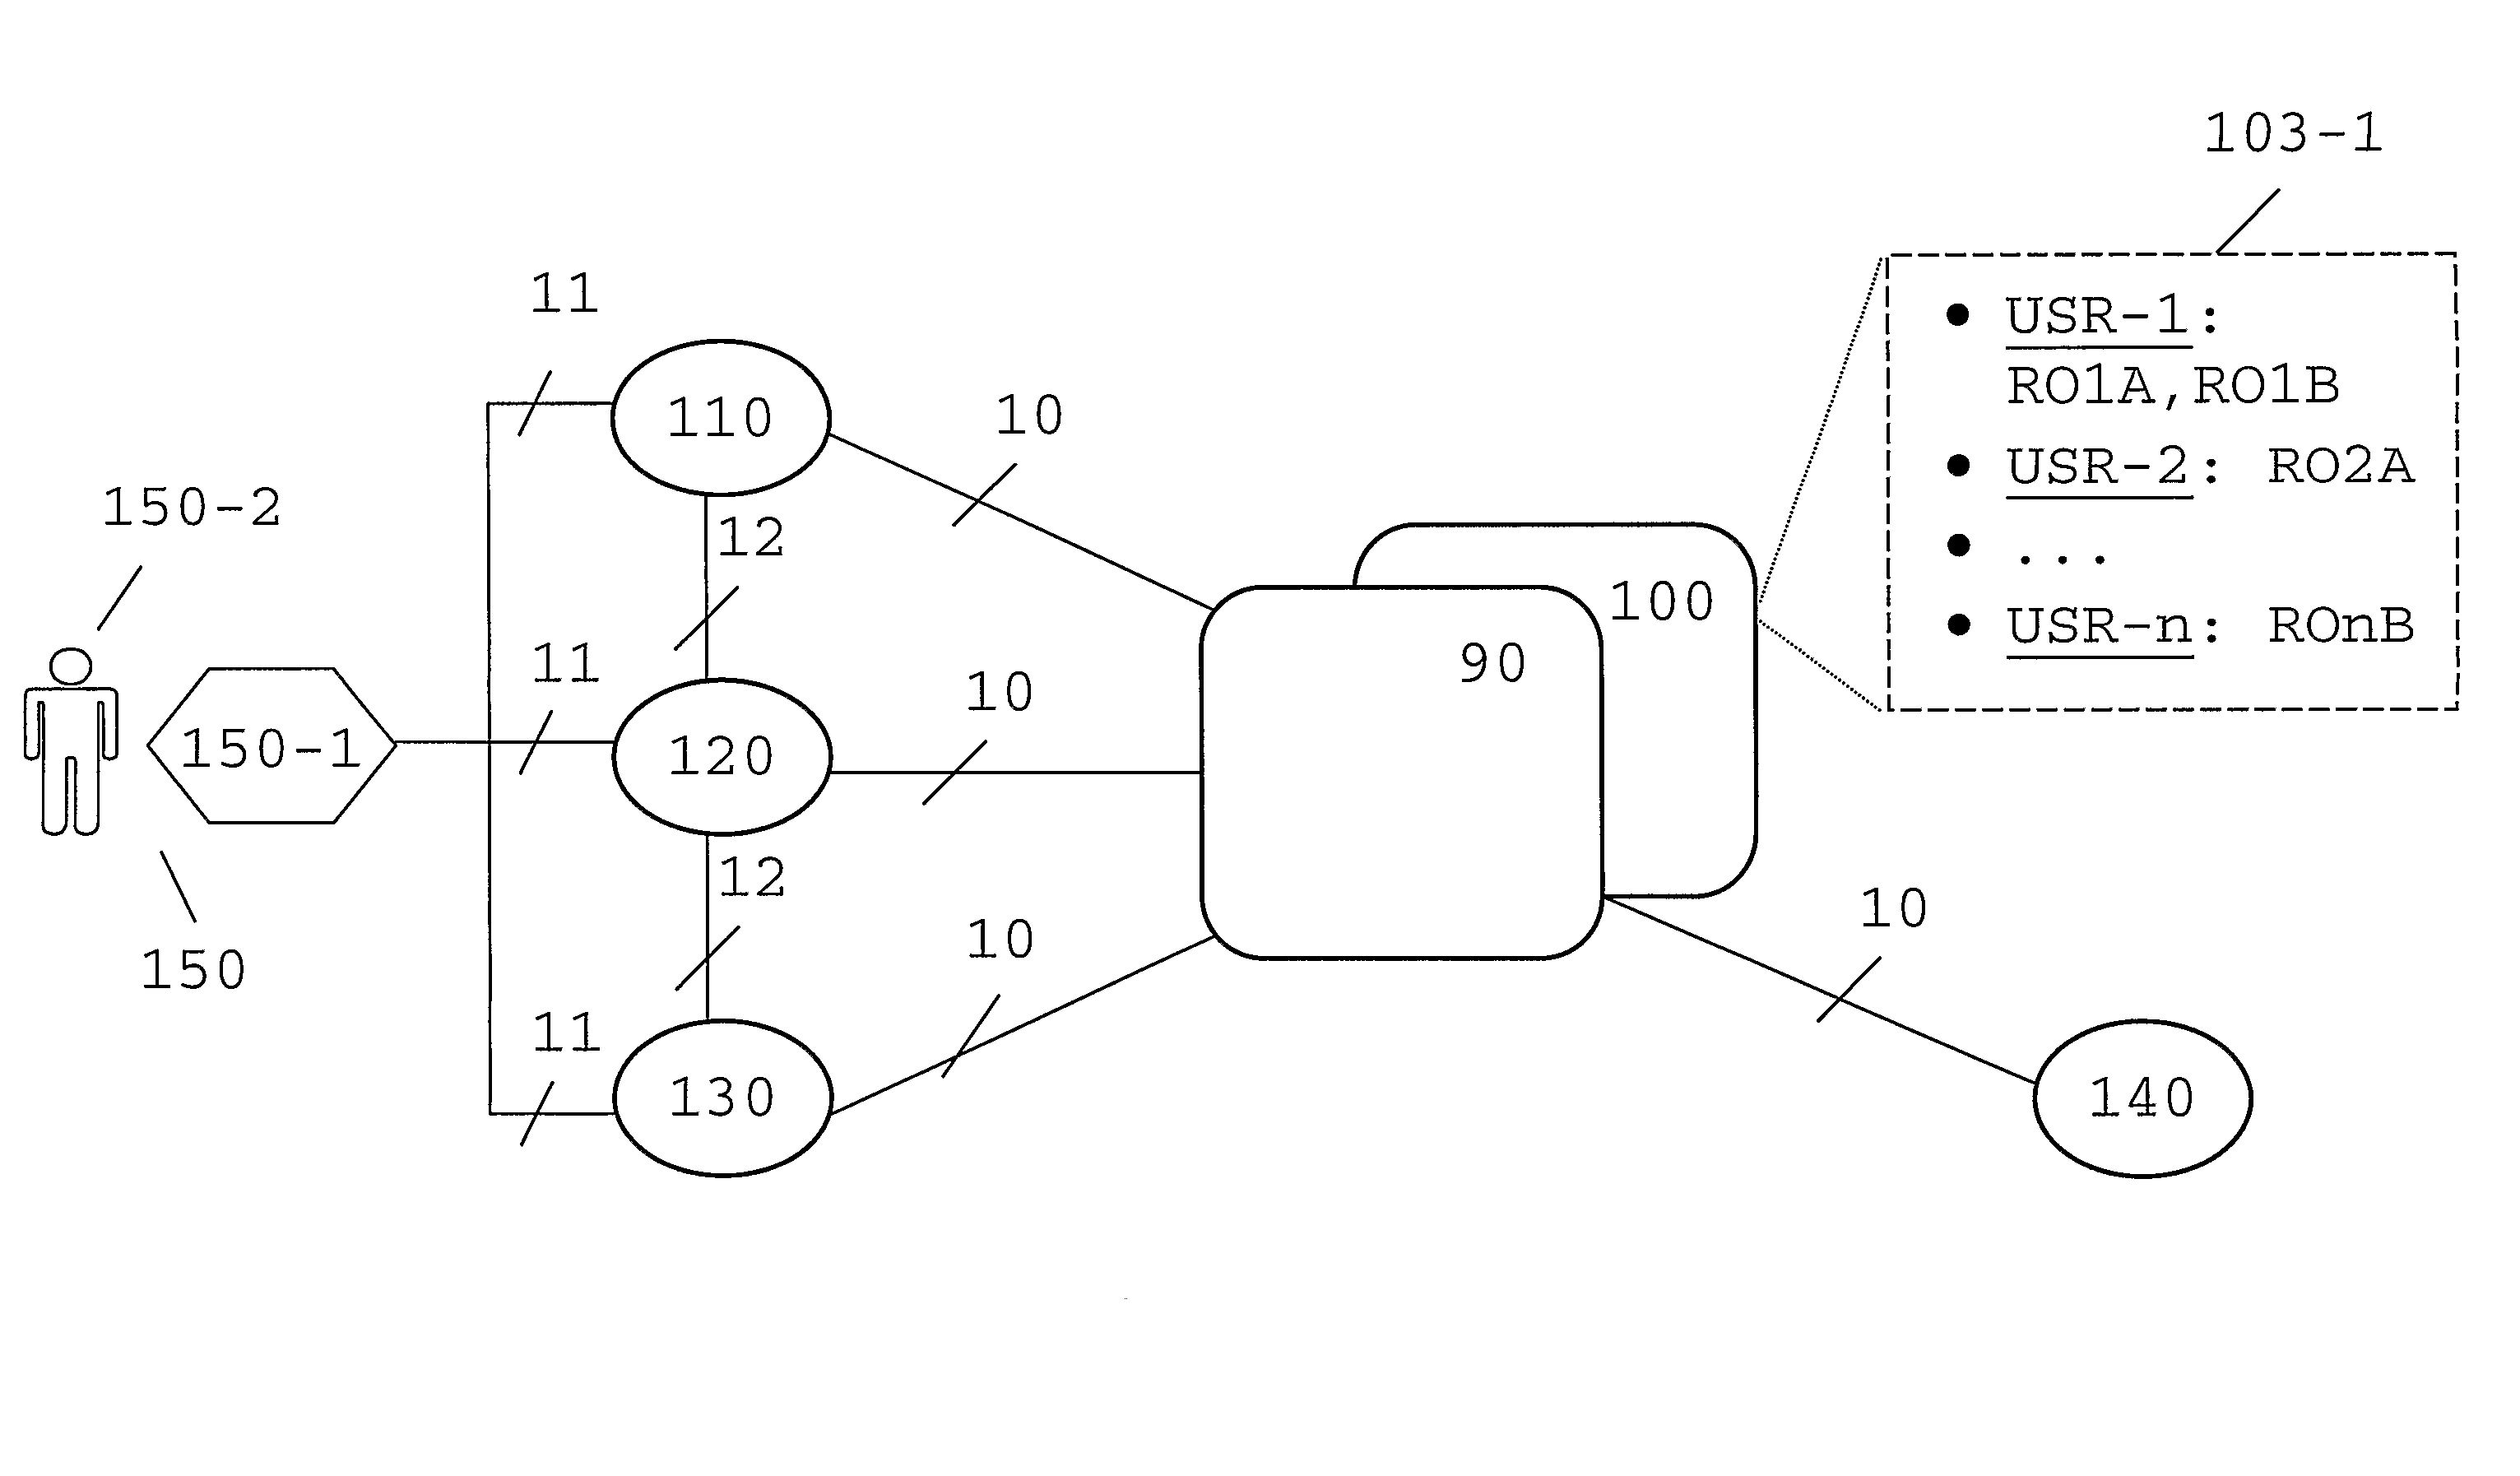 Method and apparatus for providing access to an identity service